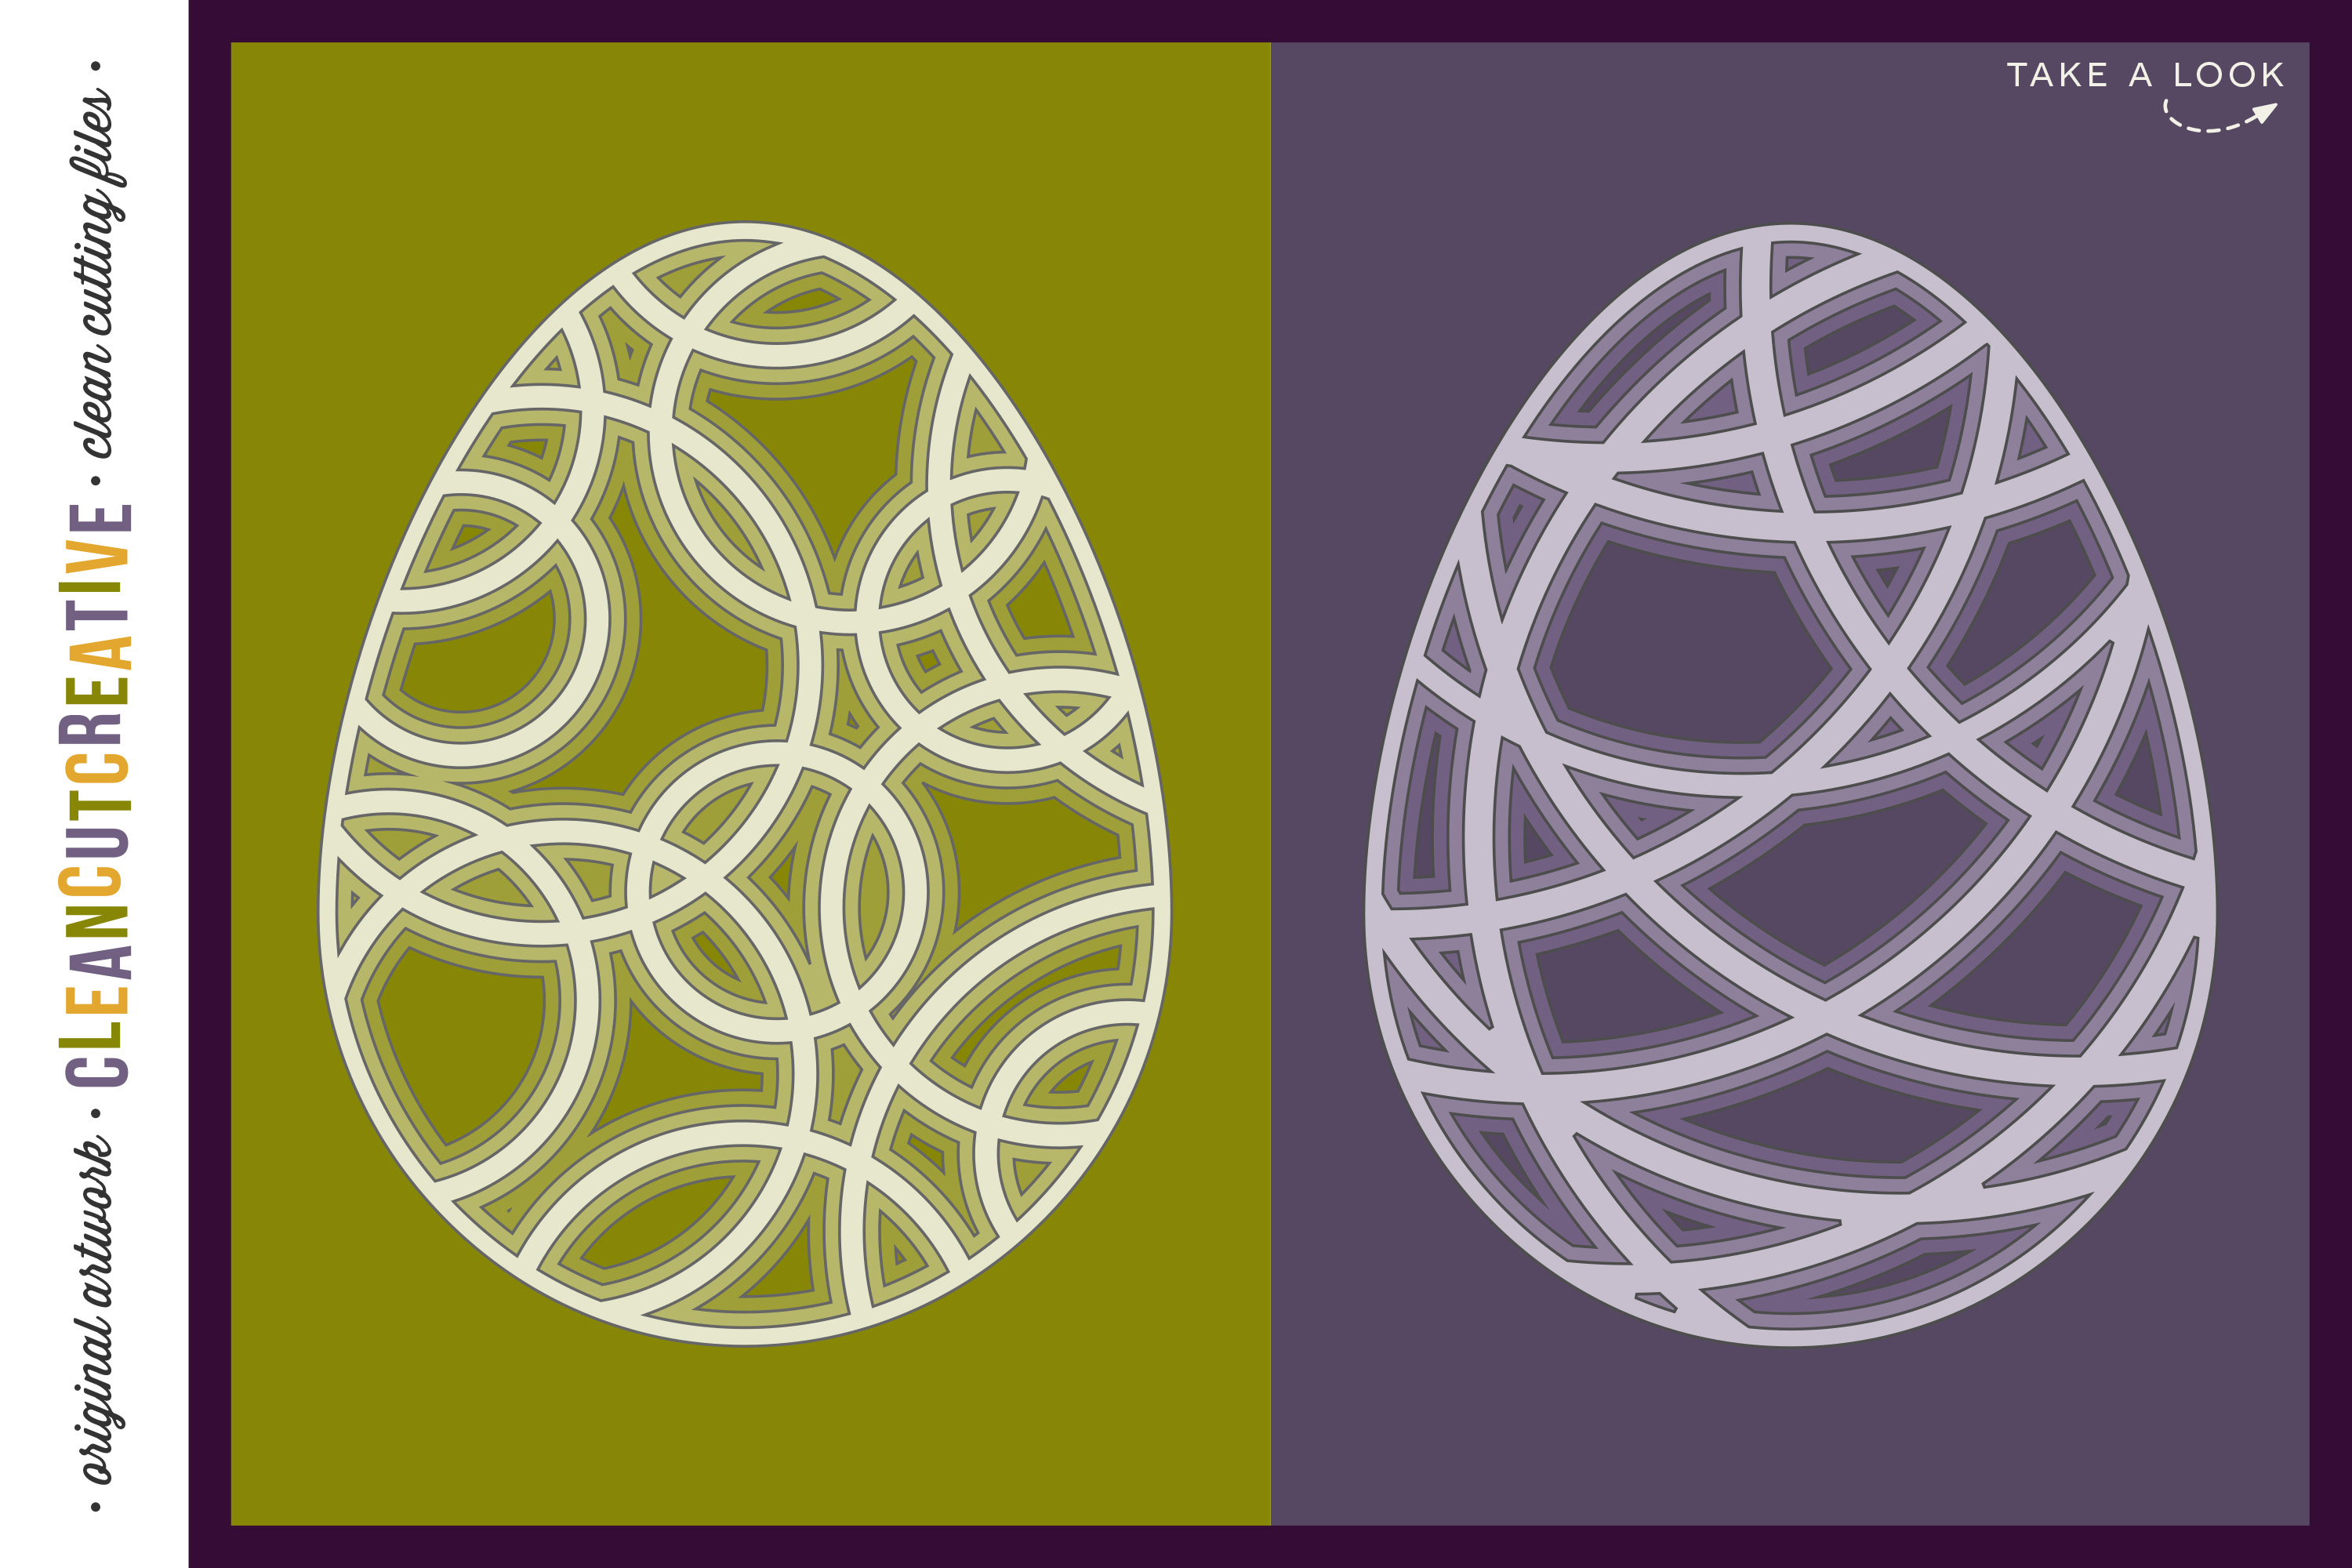 3D layered EASTER EGG shadow boxes | stacked paper art SVG